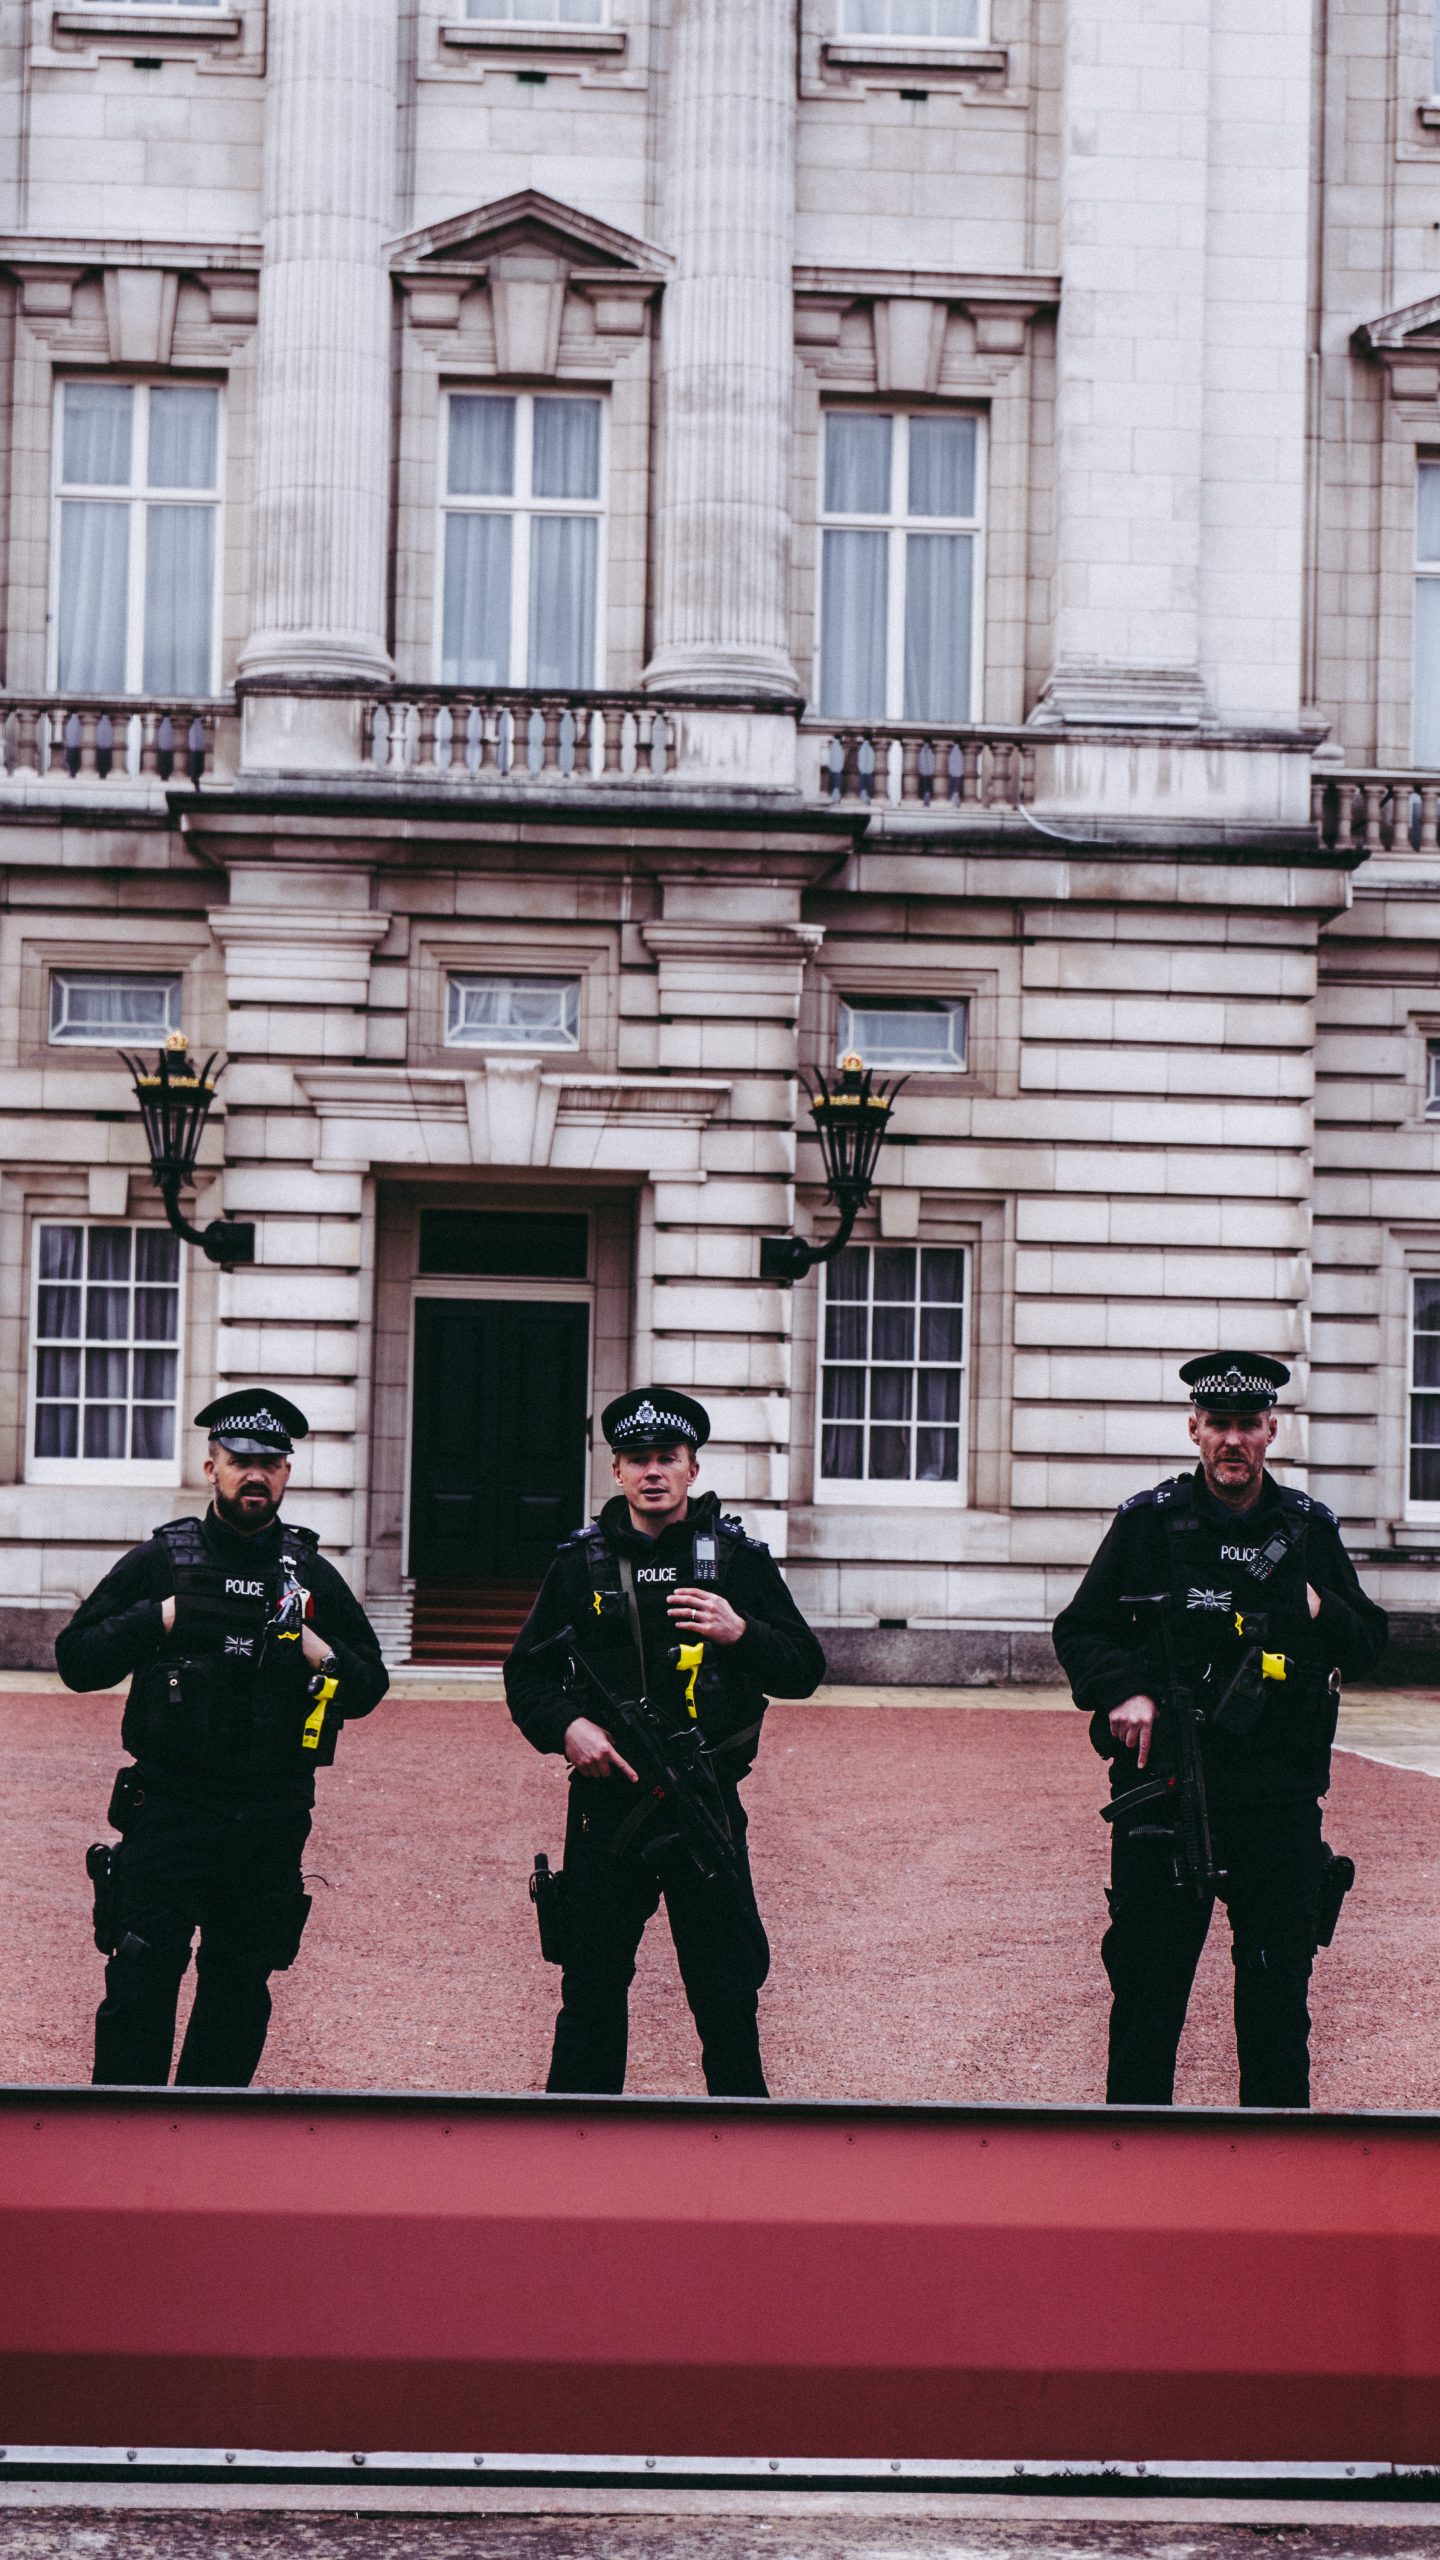 Three UK police officers stand outside a building in London. hey are armed and wear all black